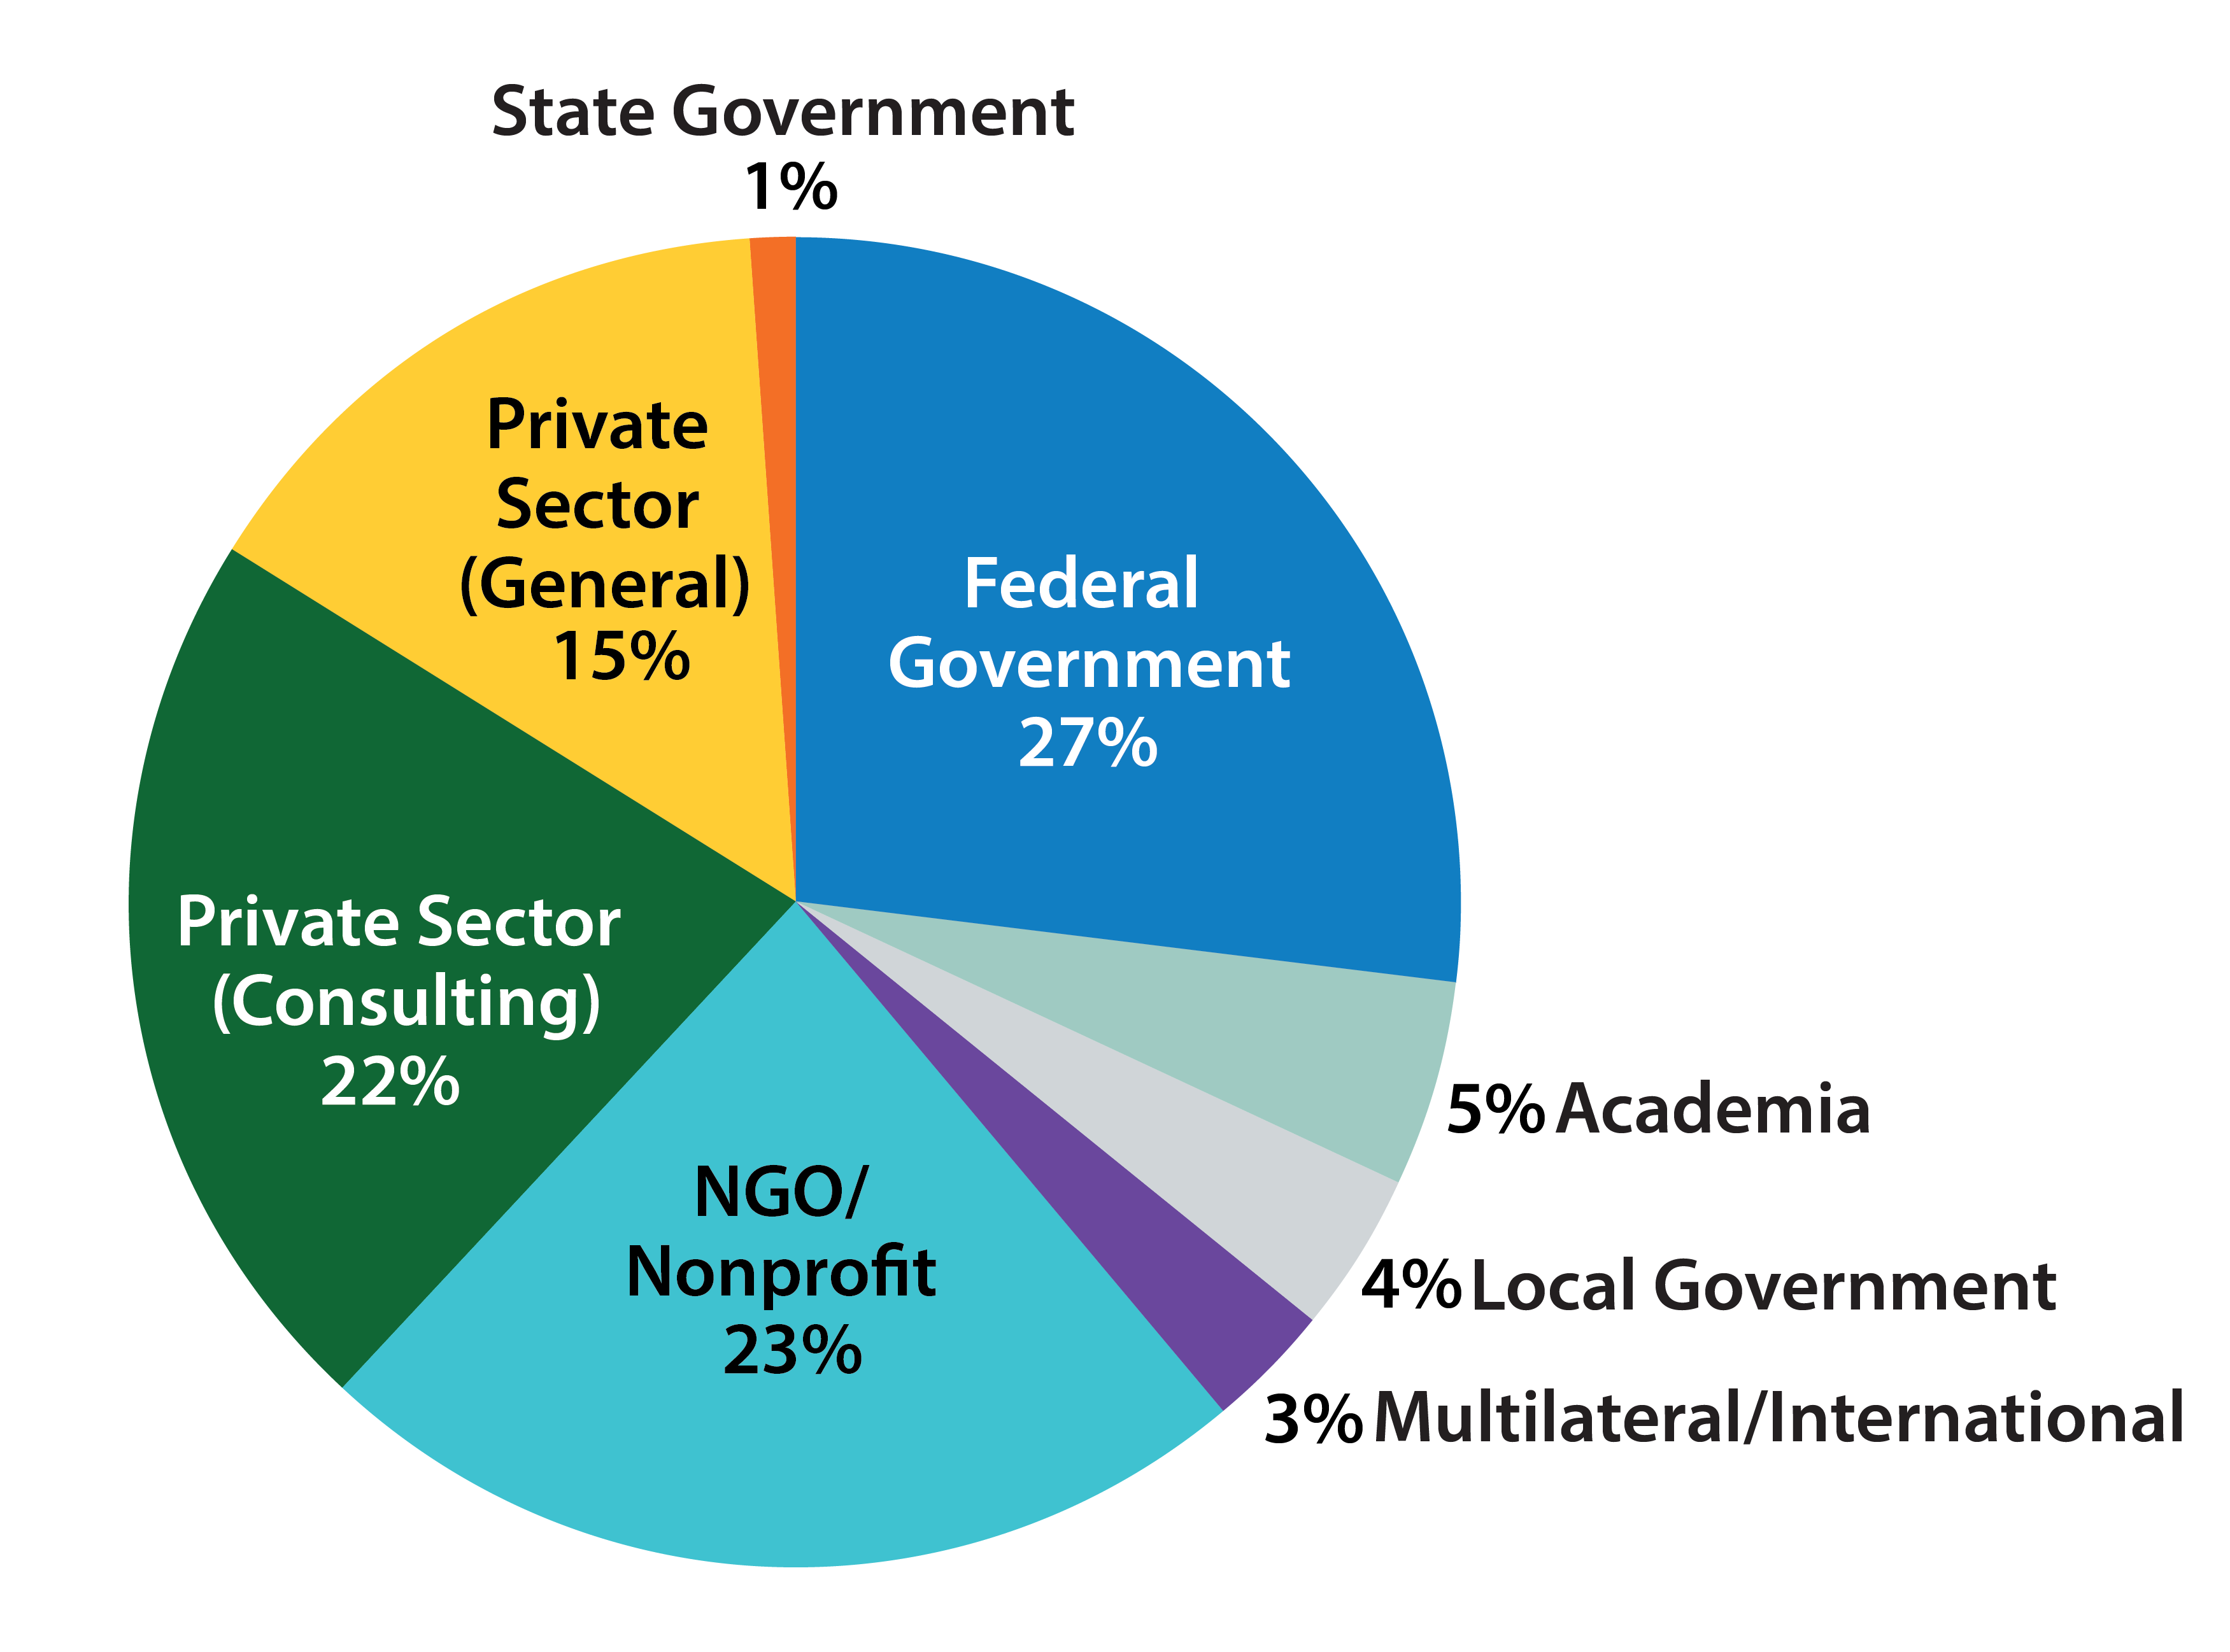 Pie Chart: State Government 1%, Federal Government 27%, Academia 5%, Local Government 4%, Multilateral/International 3%, NGO/Nonprofit 23%, Private Sector (Consulting) 22%, Private Sector (General) 15%